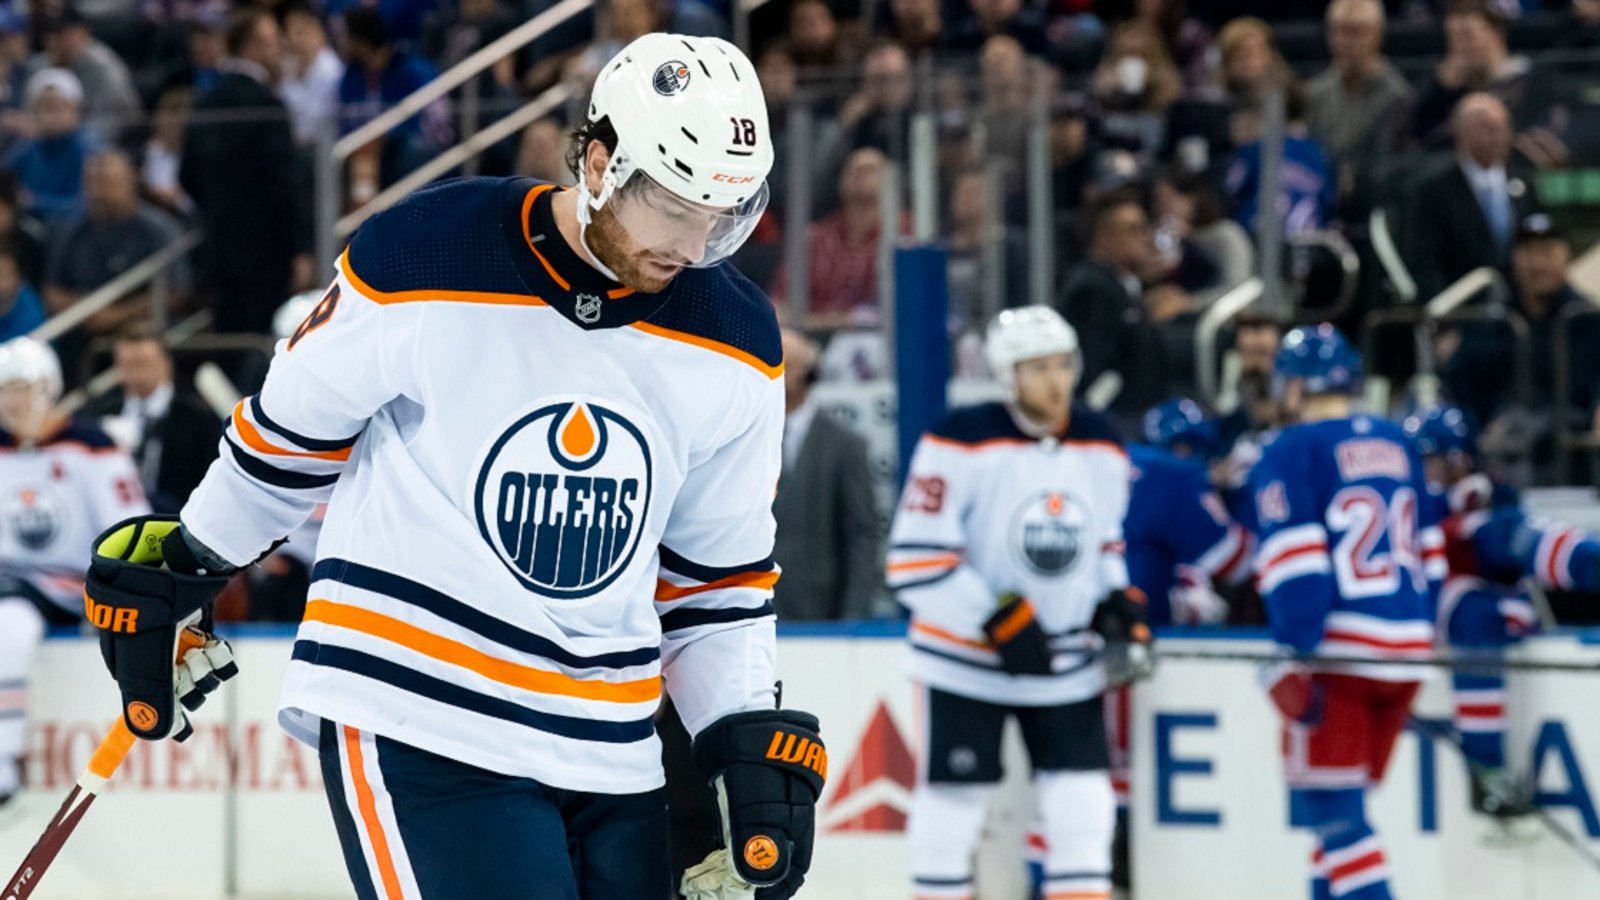 Oilers send Tyler Benson to the AHL and another move may follow.